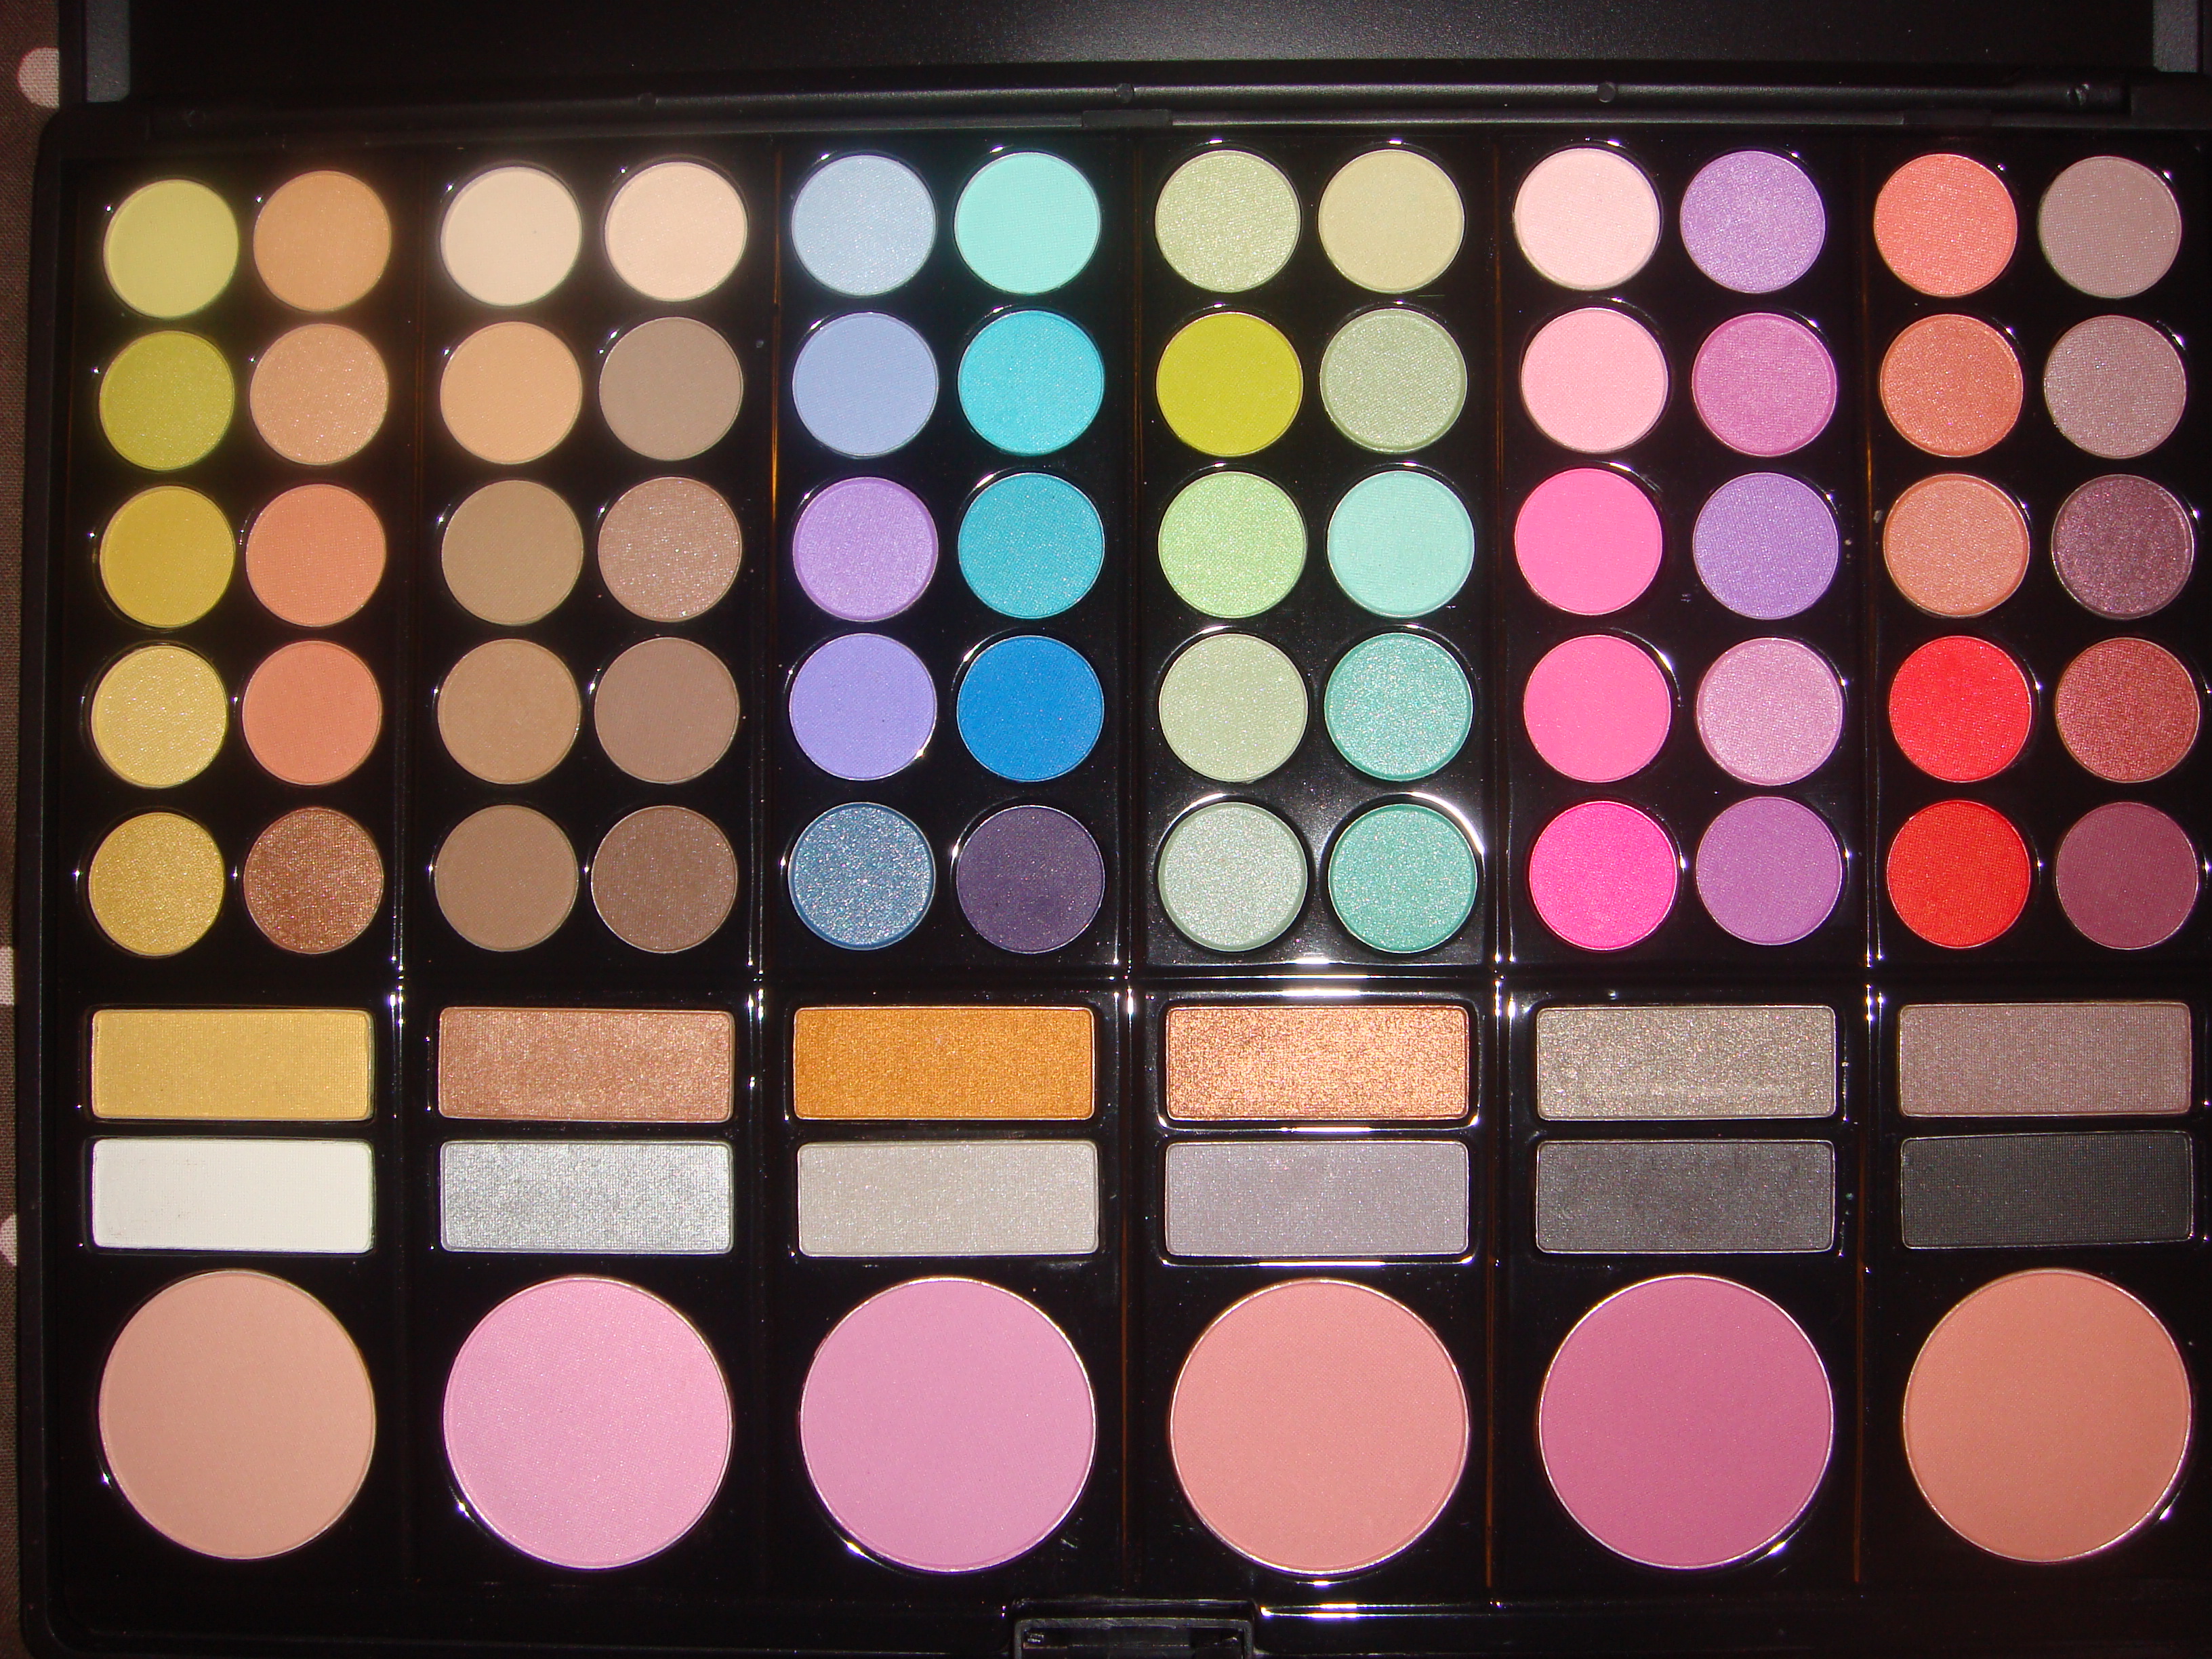 A palette to makeup make how make you look